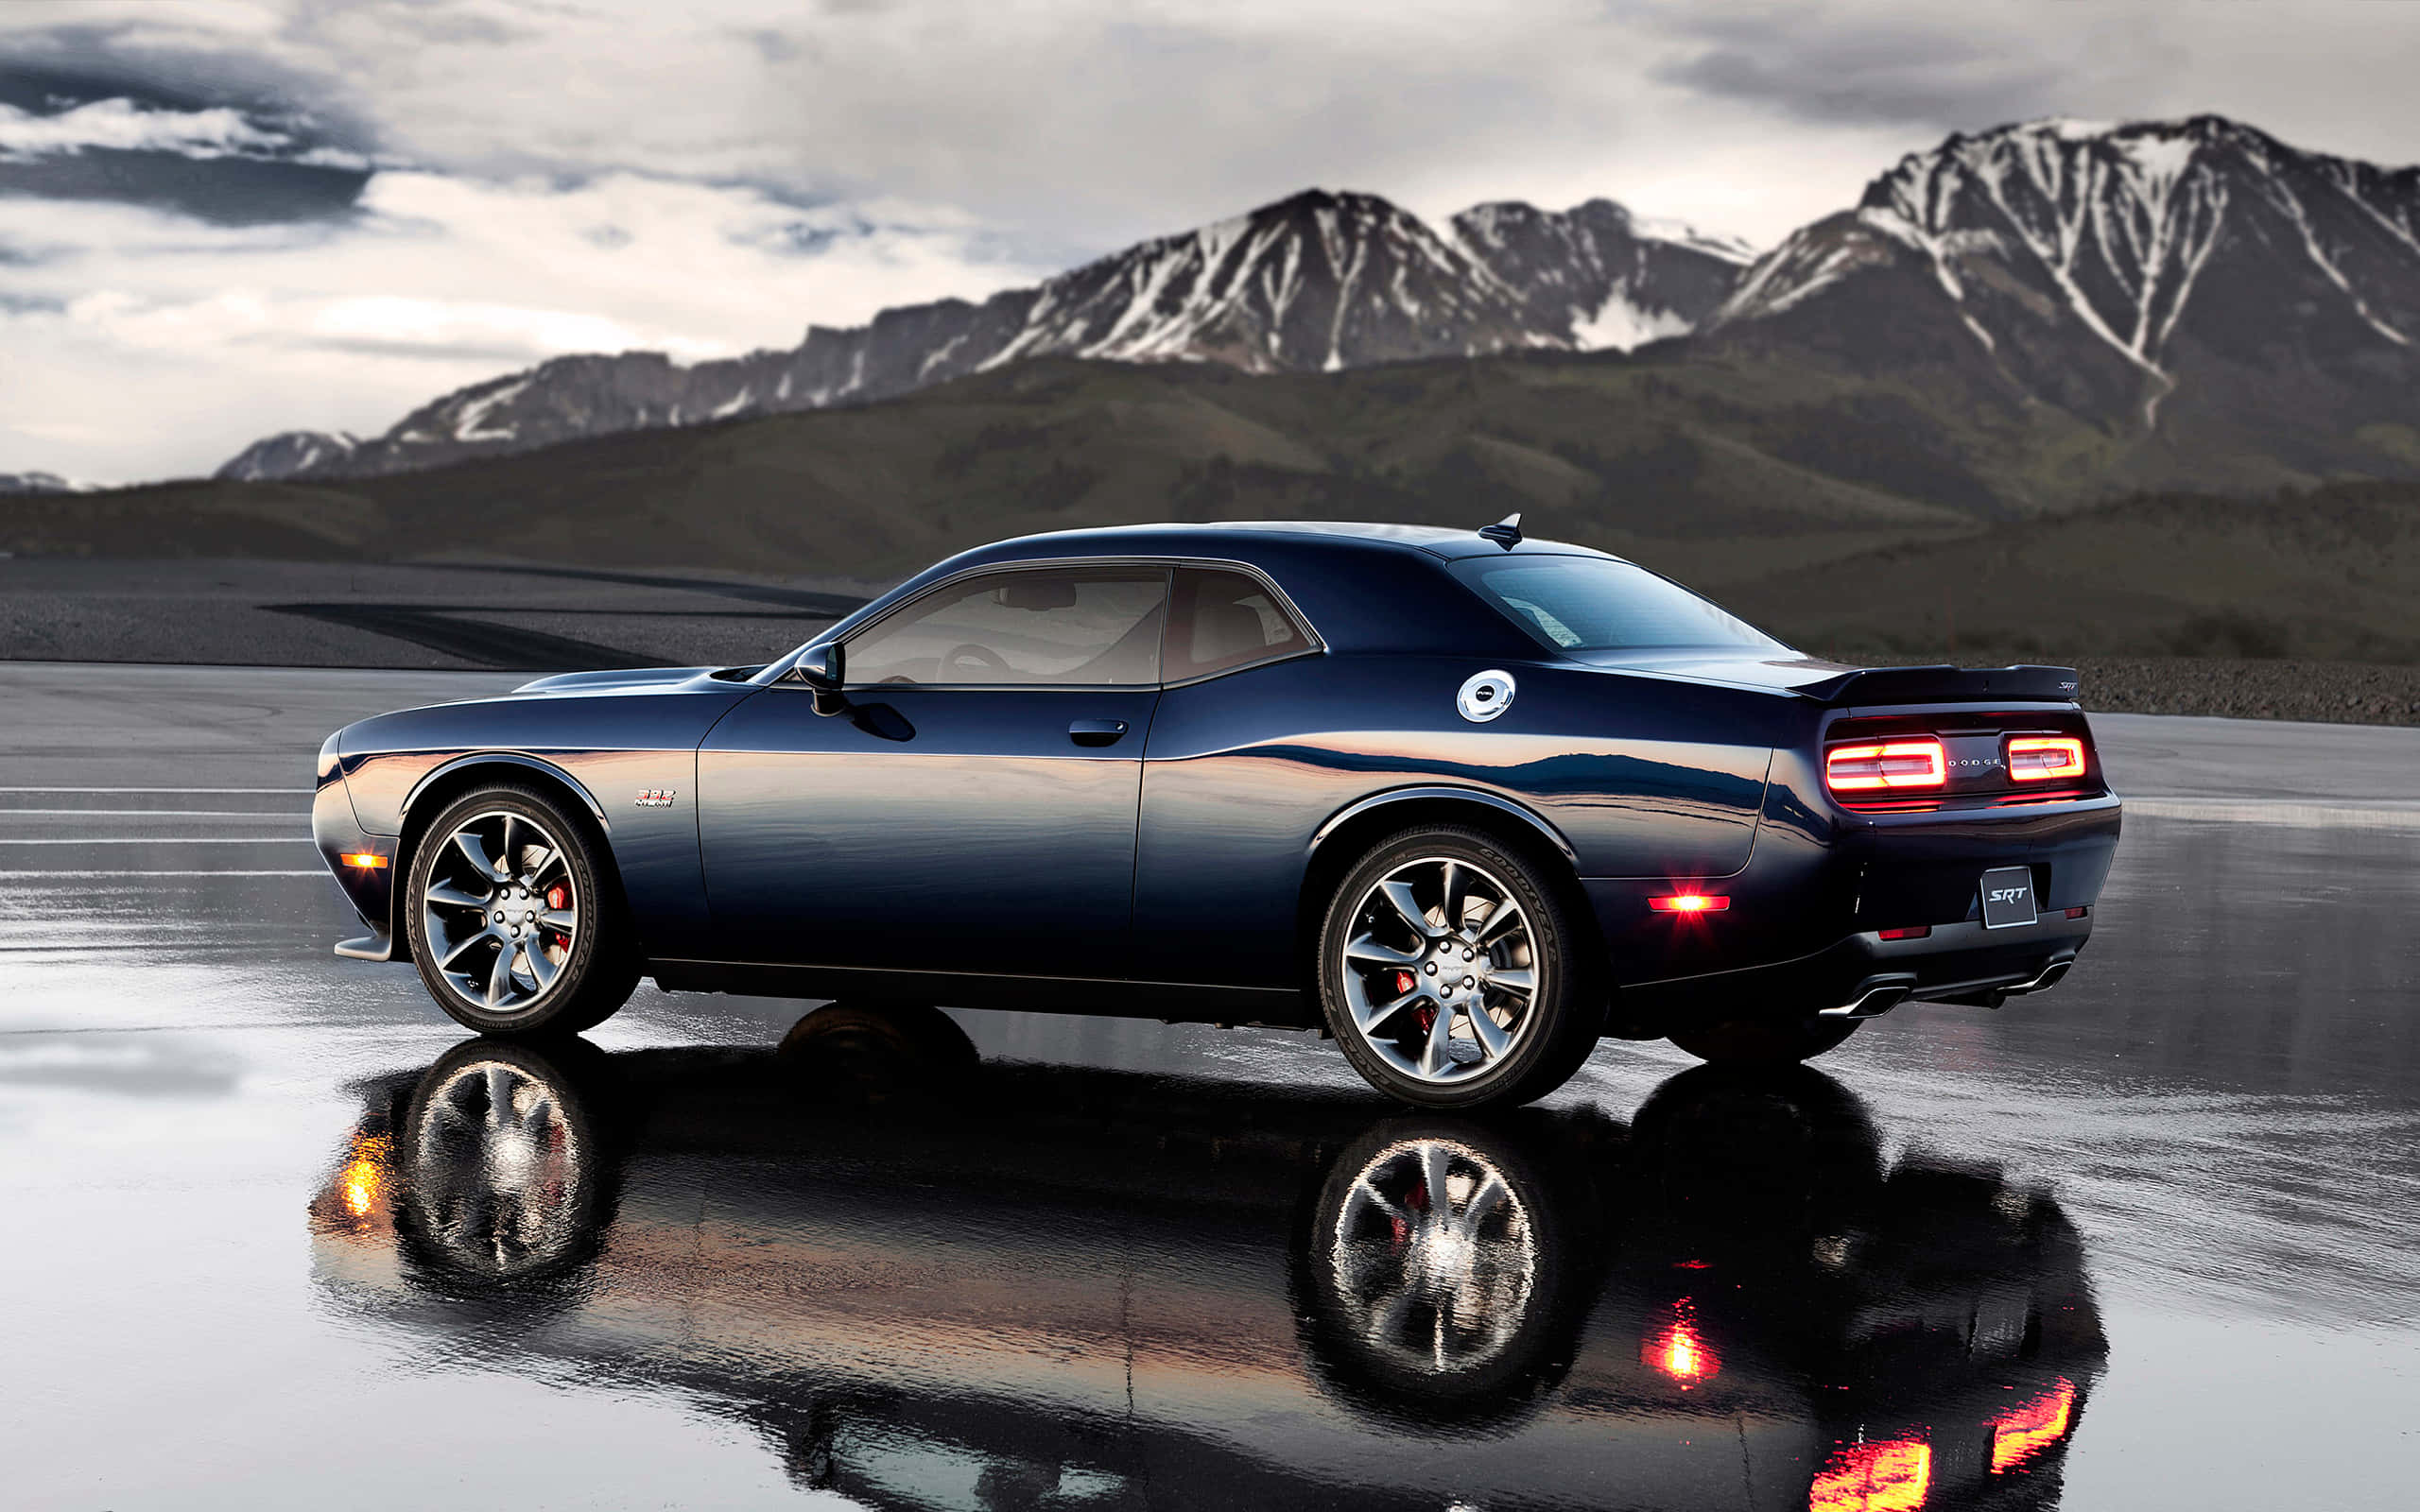 Drive in style with the stylish Dodge Hellcat. Wallpaper